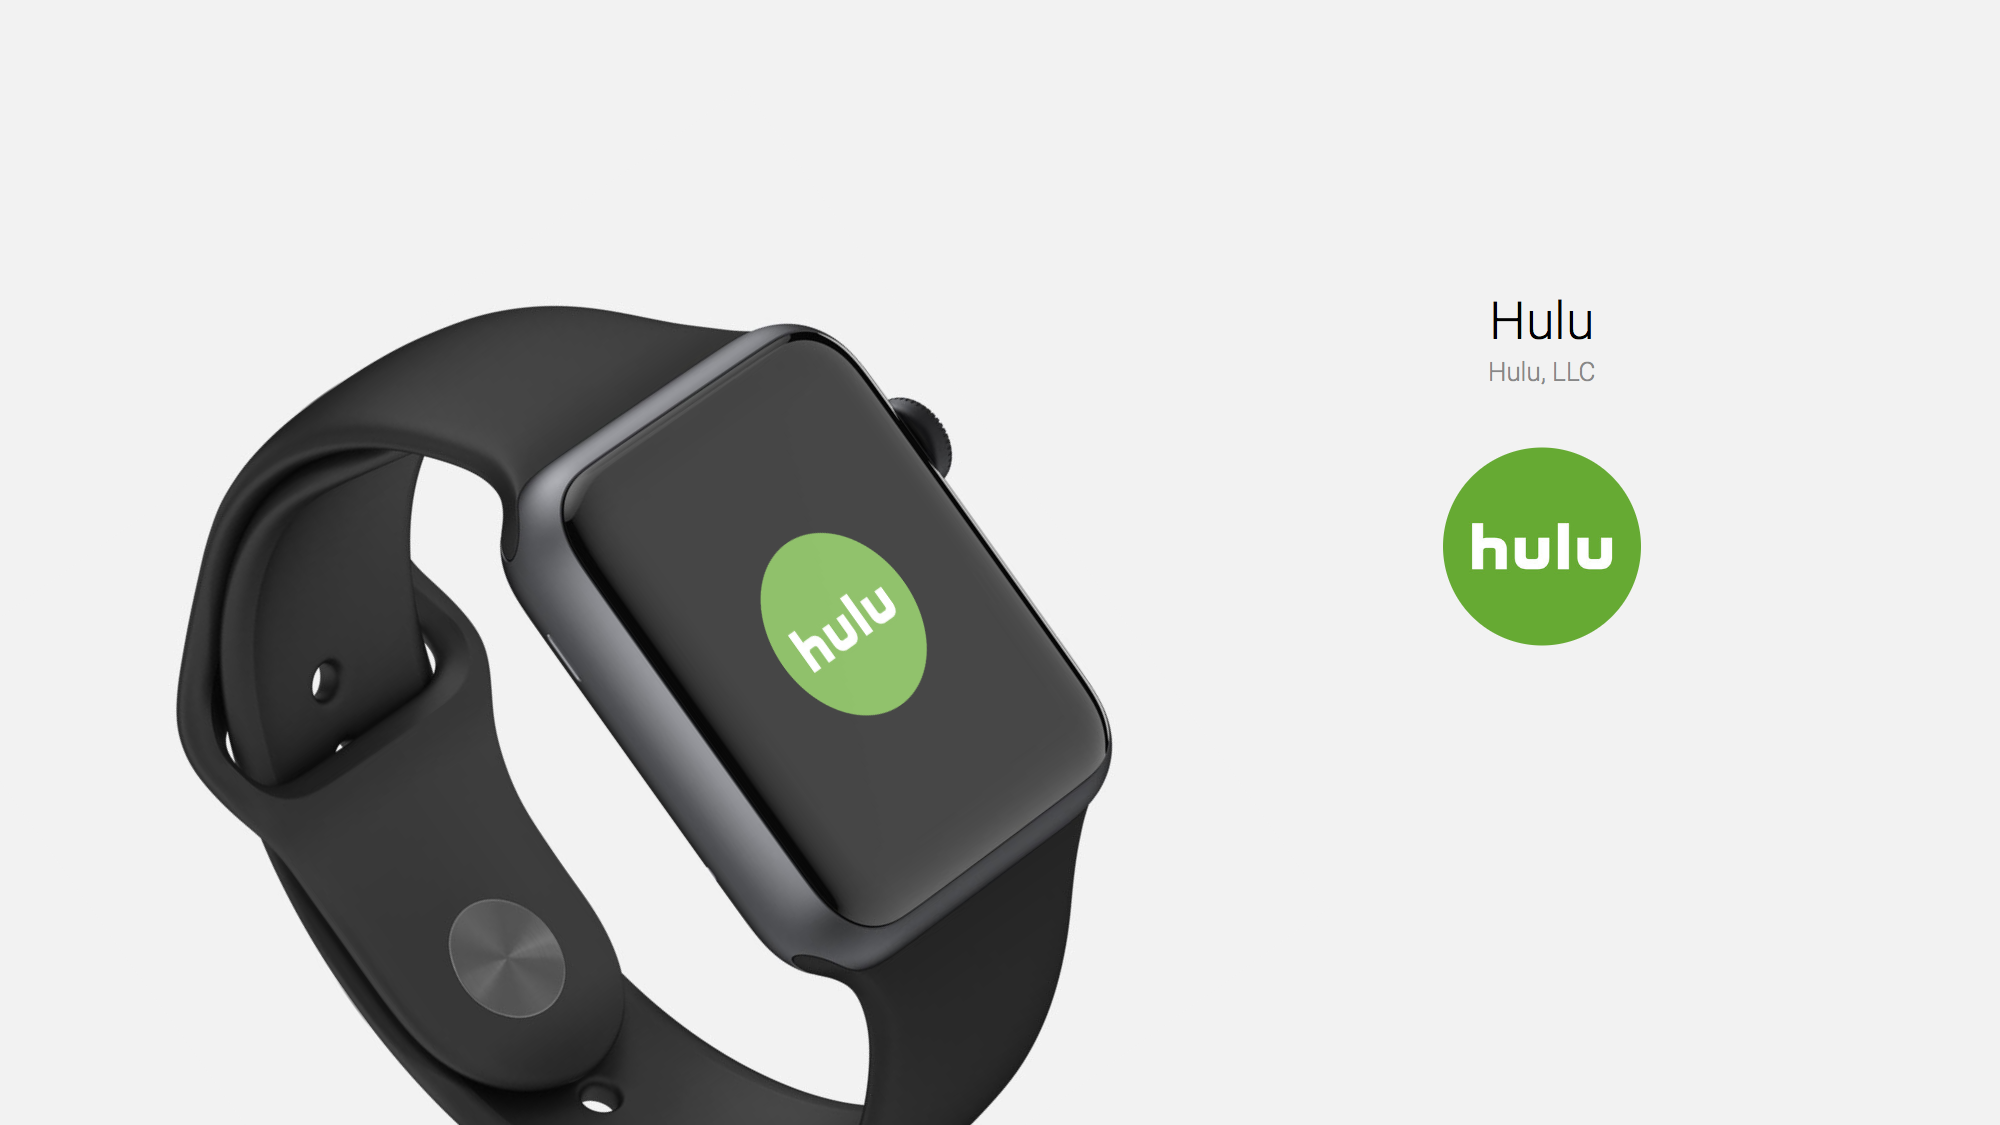 You Can Now Control Hulu Right From Your Wrist